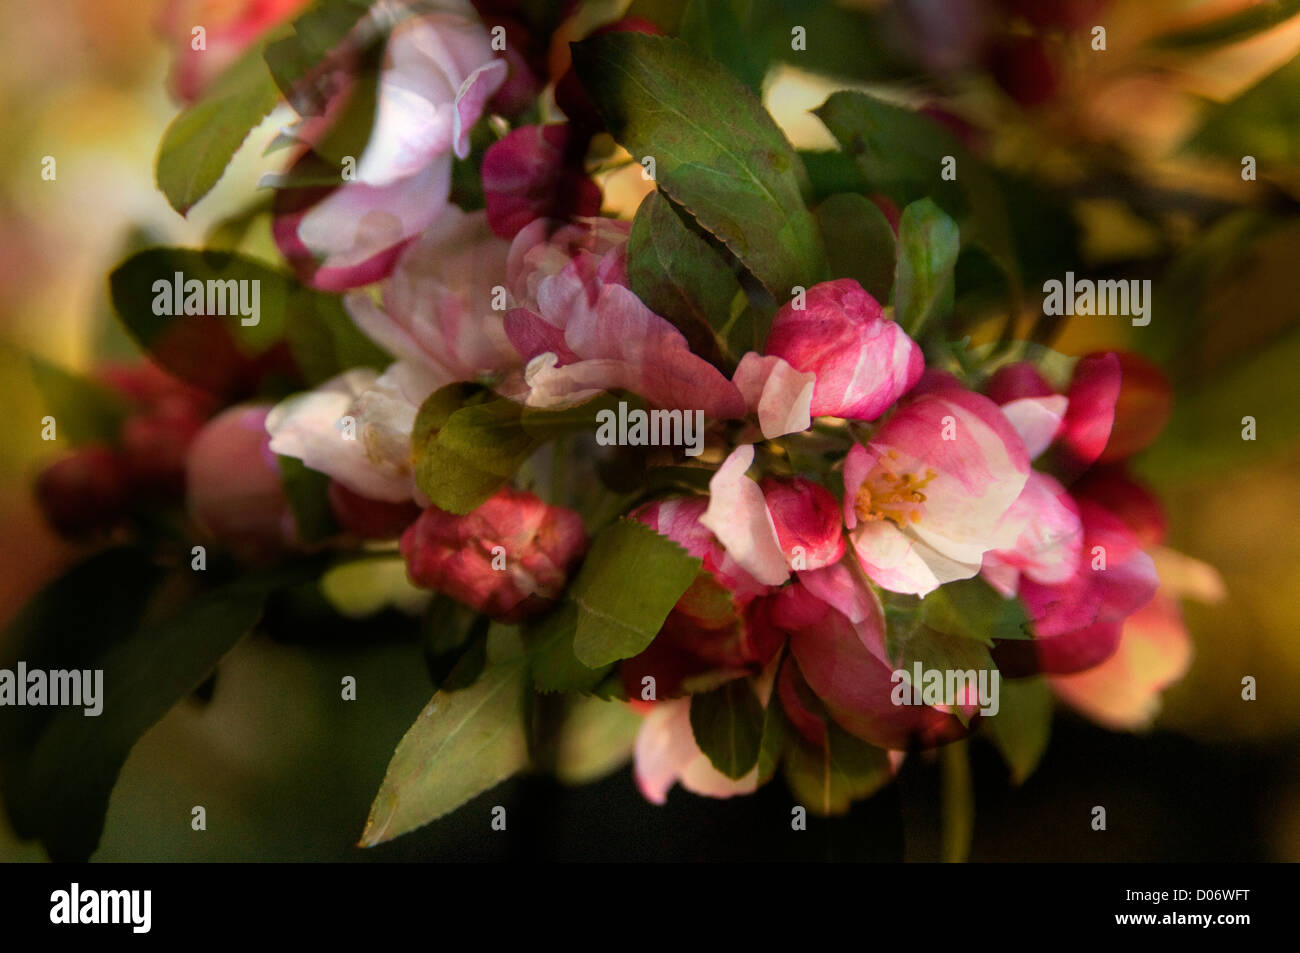 Cherry Blossom Flowers in a Digital Composite Stock Photo